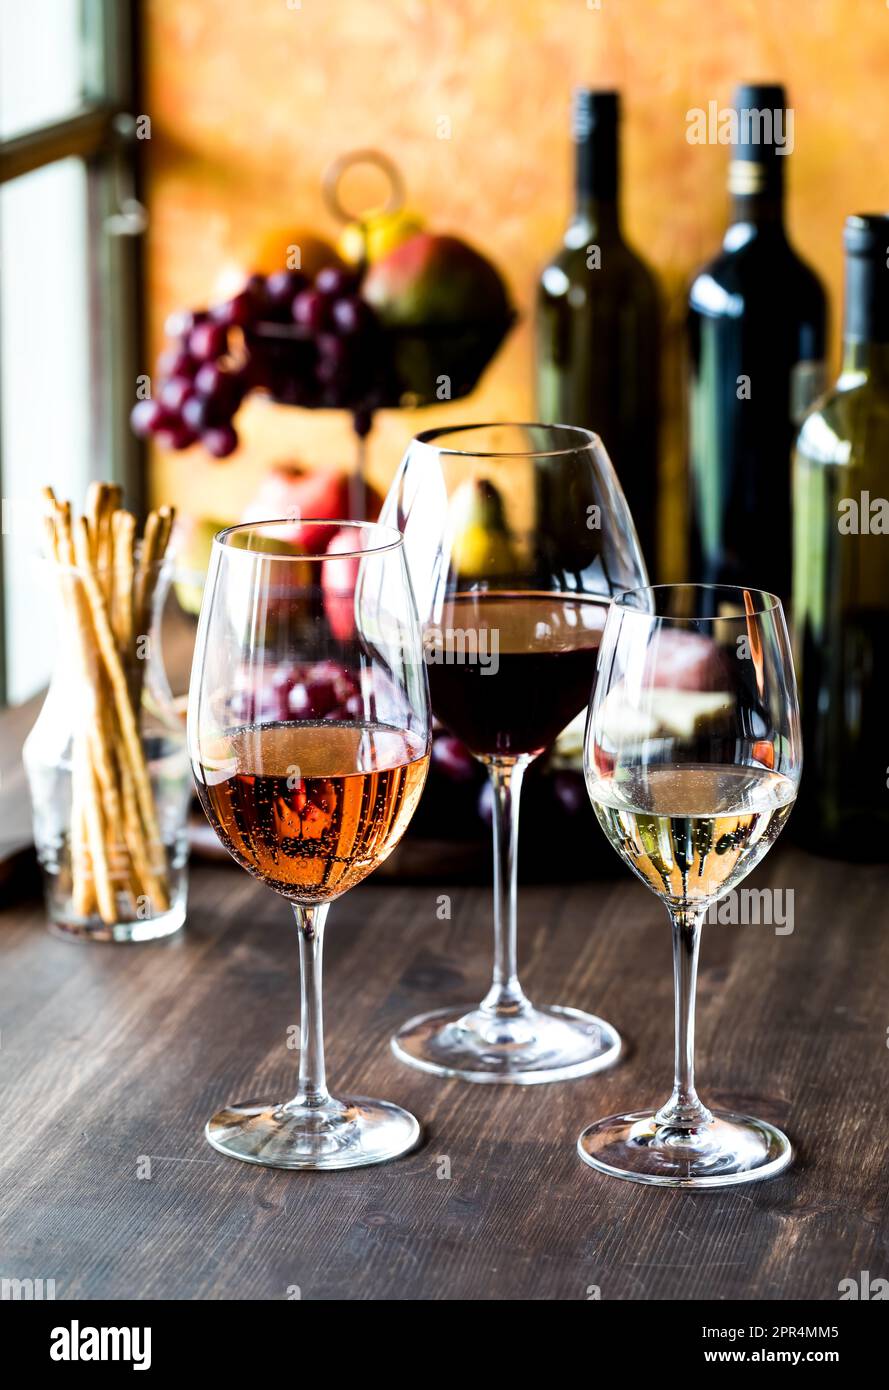 long stem wine glasses containing red, white and rose wine.  Stock Photo